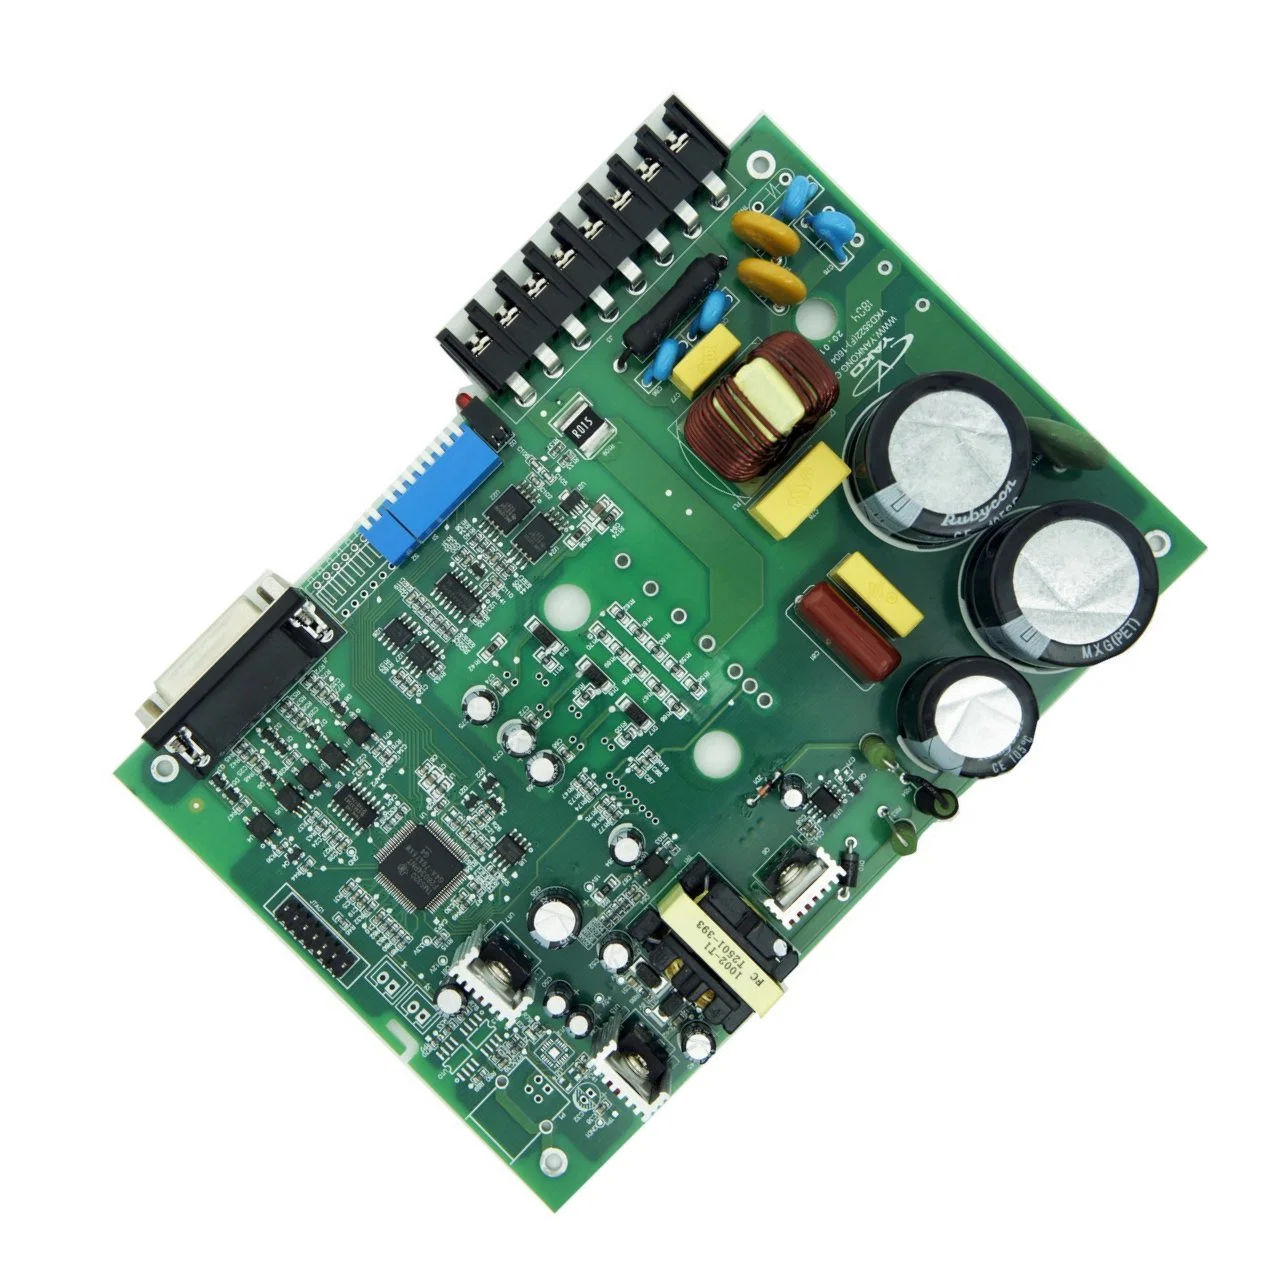 Shenzhen Custom Printed Circuit Board PCB Manufacturer Electronic PCB Assembly SMT DIP PCBA